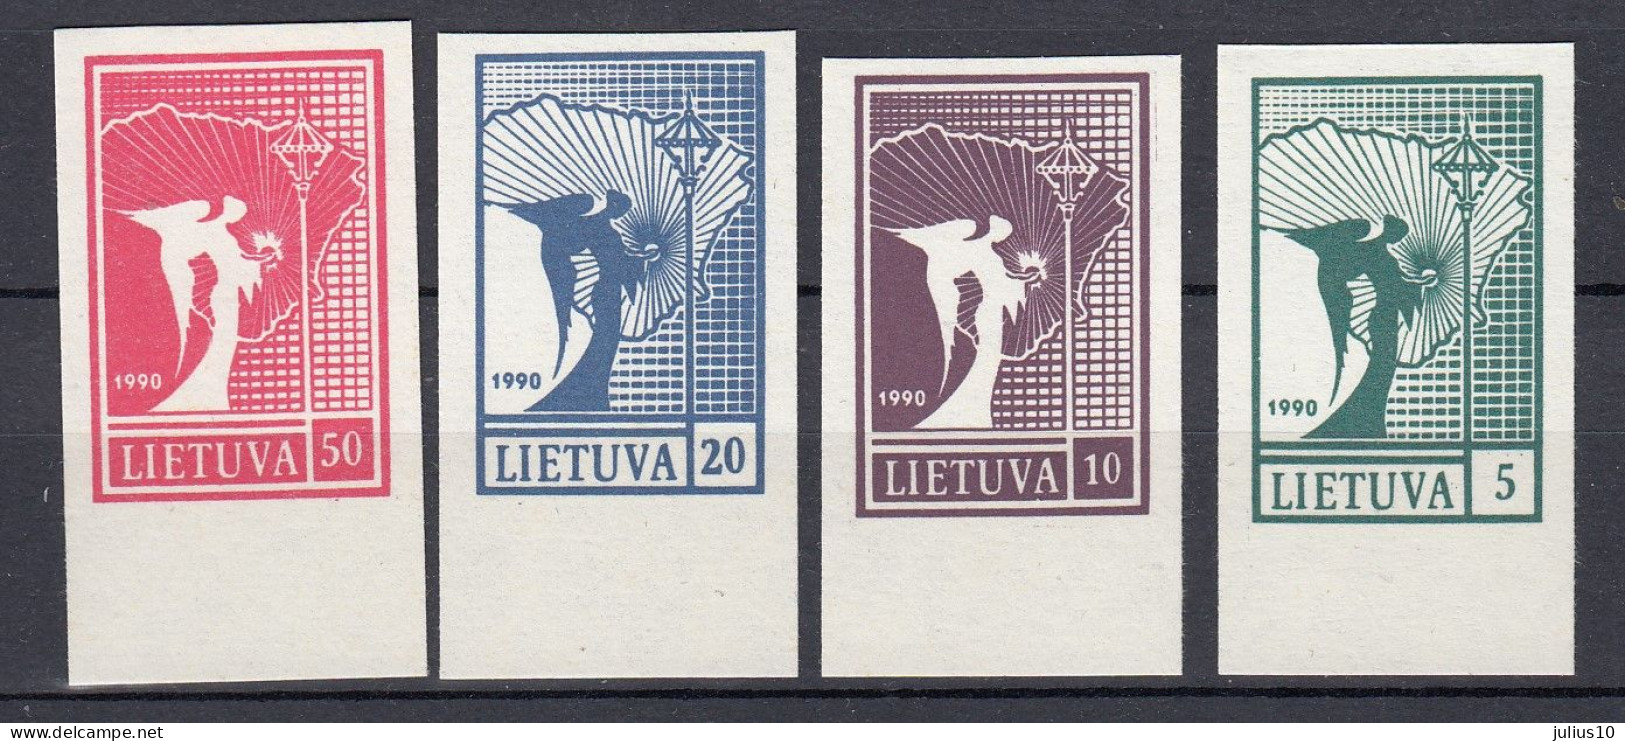 LITHUANIA 1990 First Stamps MNH(**) Mi 457-460 #Lt1162 - Lithuania